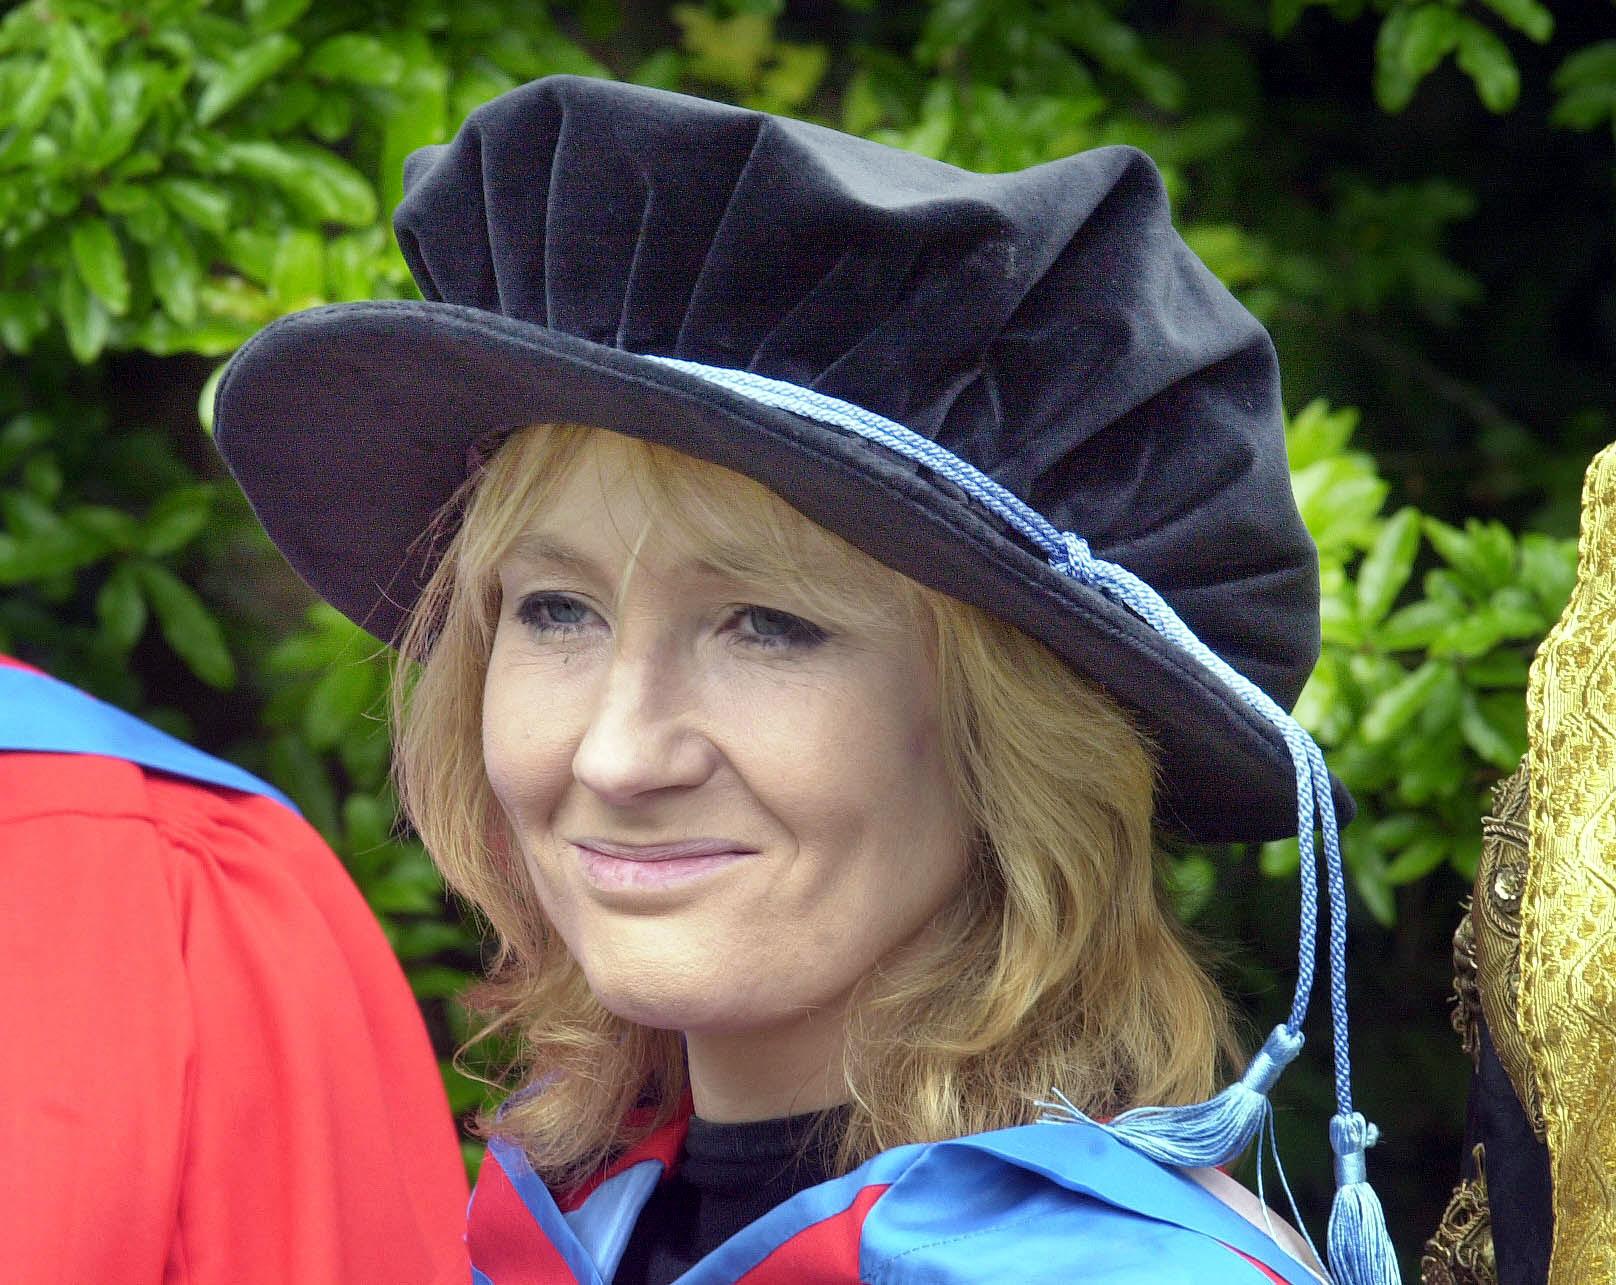 JK Rowling returns to her former university Exeter to collect an honorary Doctor of Letters degree. | Source: Getty Images